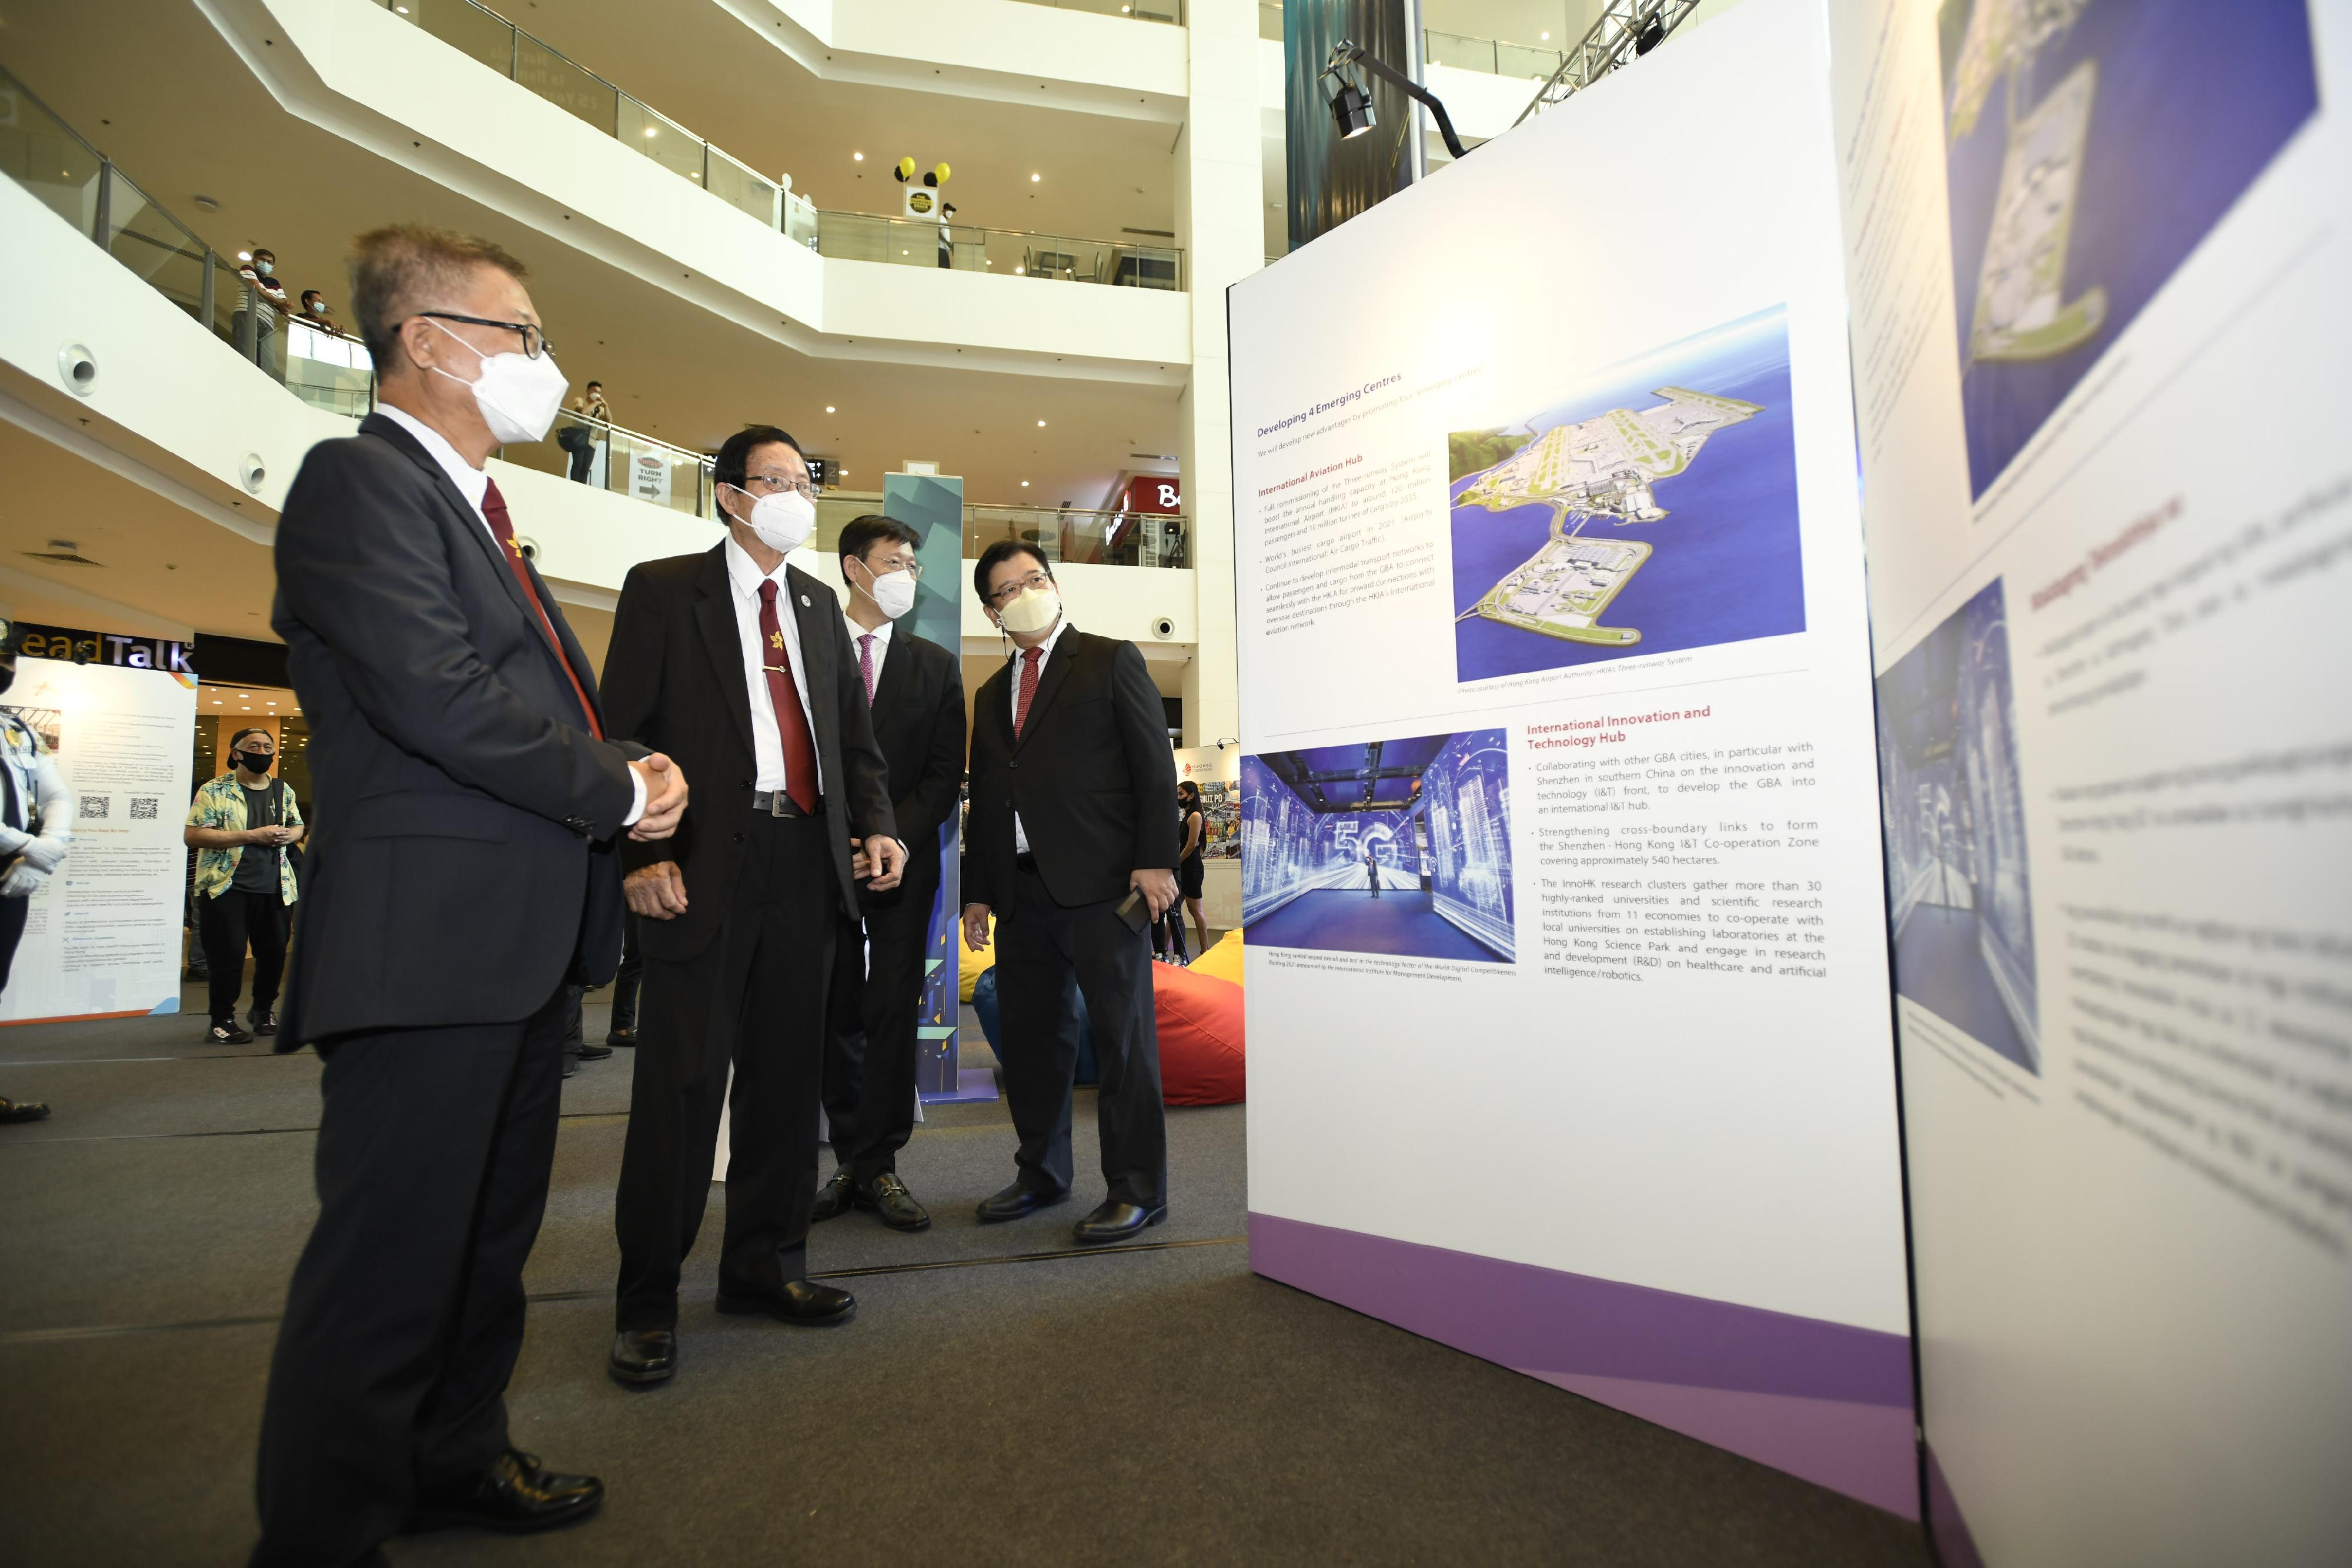 The Hong Kong Economic and Trade Office, Jakarta today (October 14) launched the "Marvels in Hong Kong: 25 Years and Beyond" roving exhibition in Manila, the Philippines, to celebrate the 25th anniversary of the establishment of the Hong Kong Special Administrative Region. Photo shows the guests touring the exhibition after the opening ceremony.